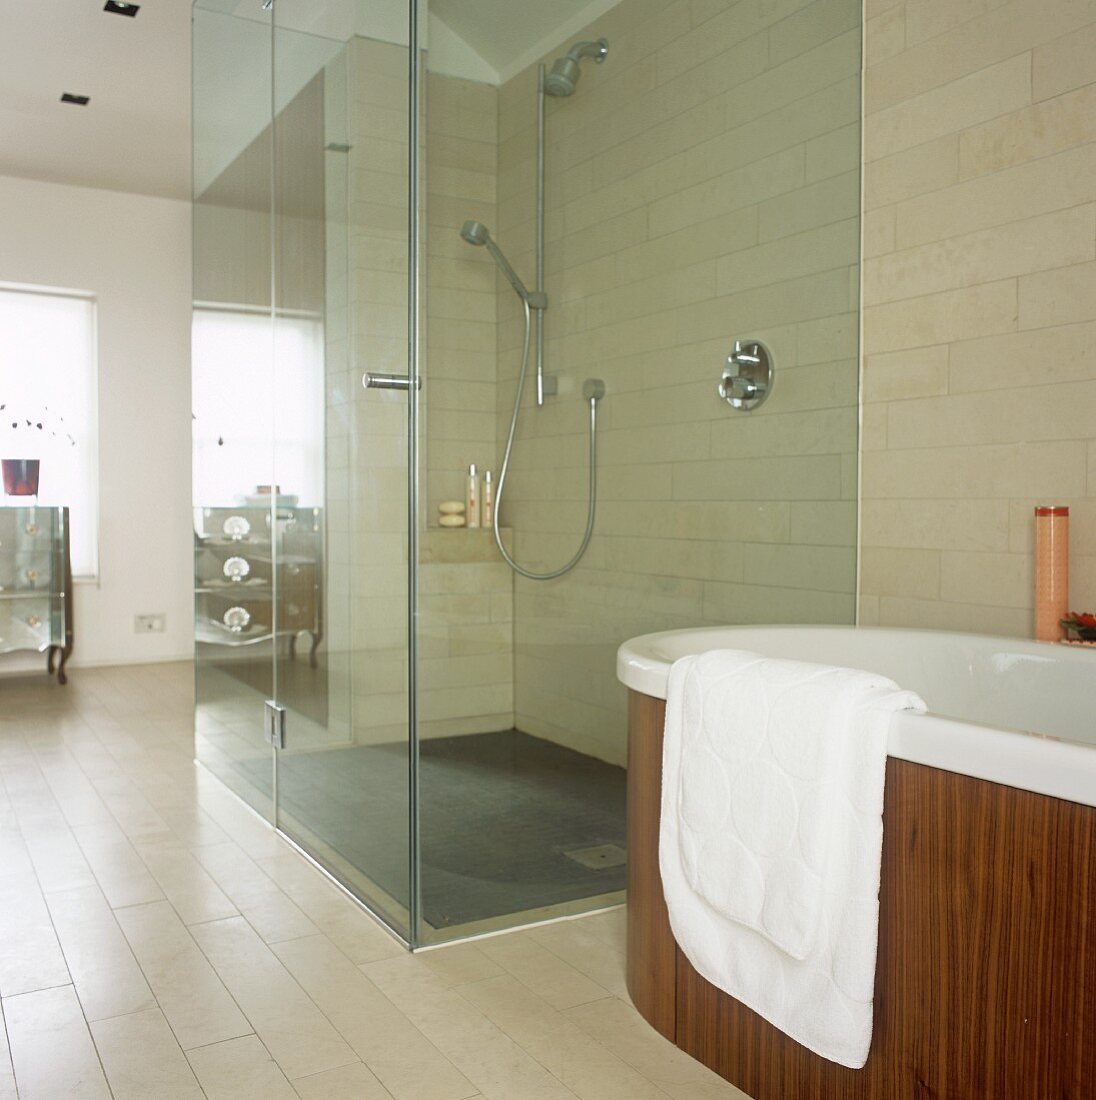 Walk in shower with glass wall next to a free standing bathtub